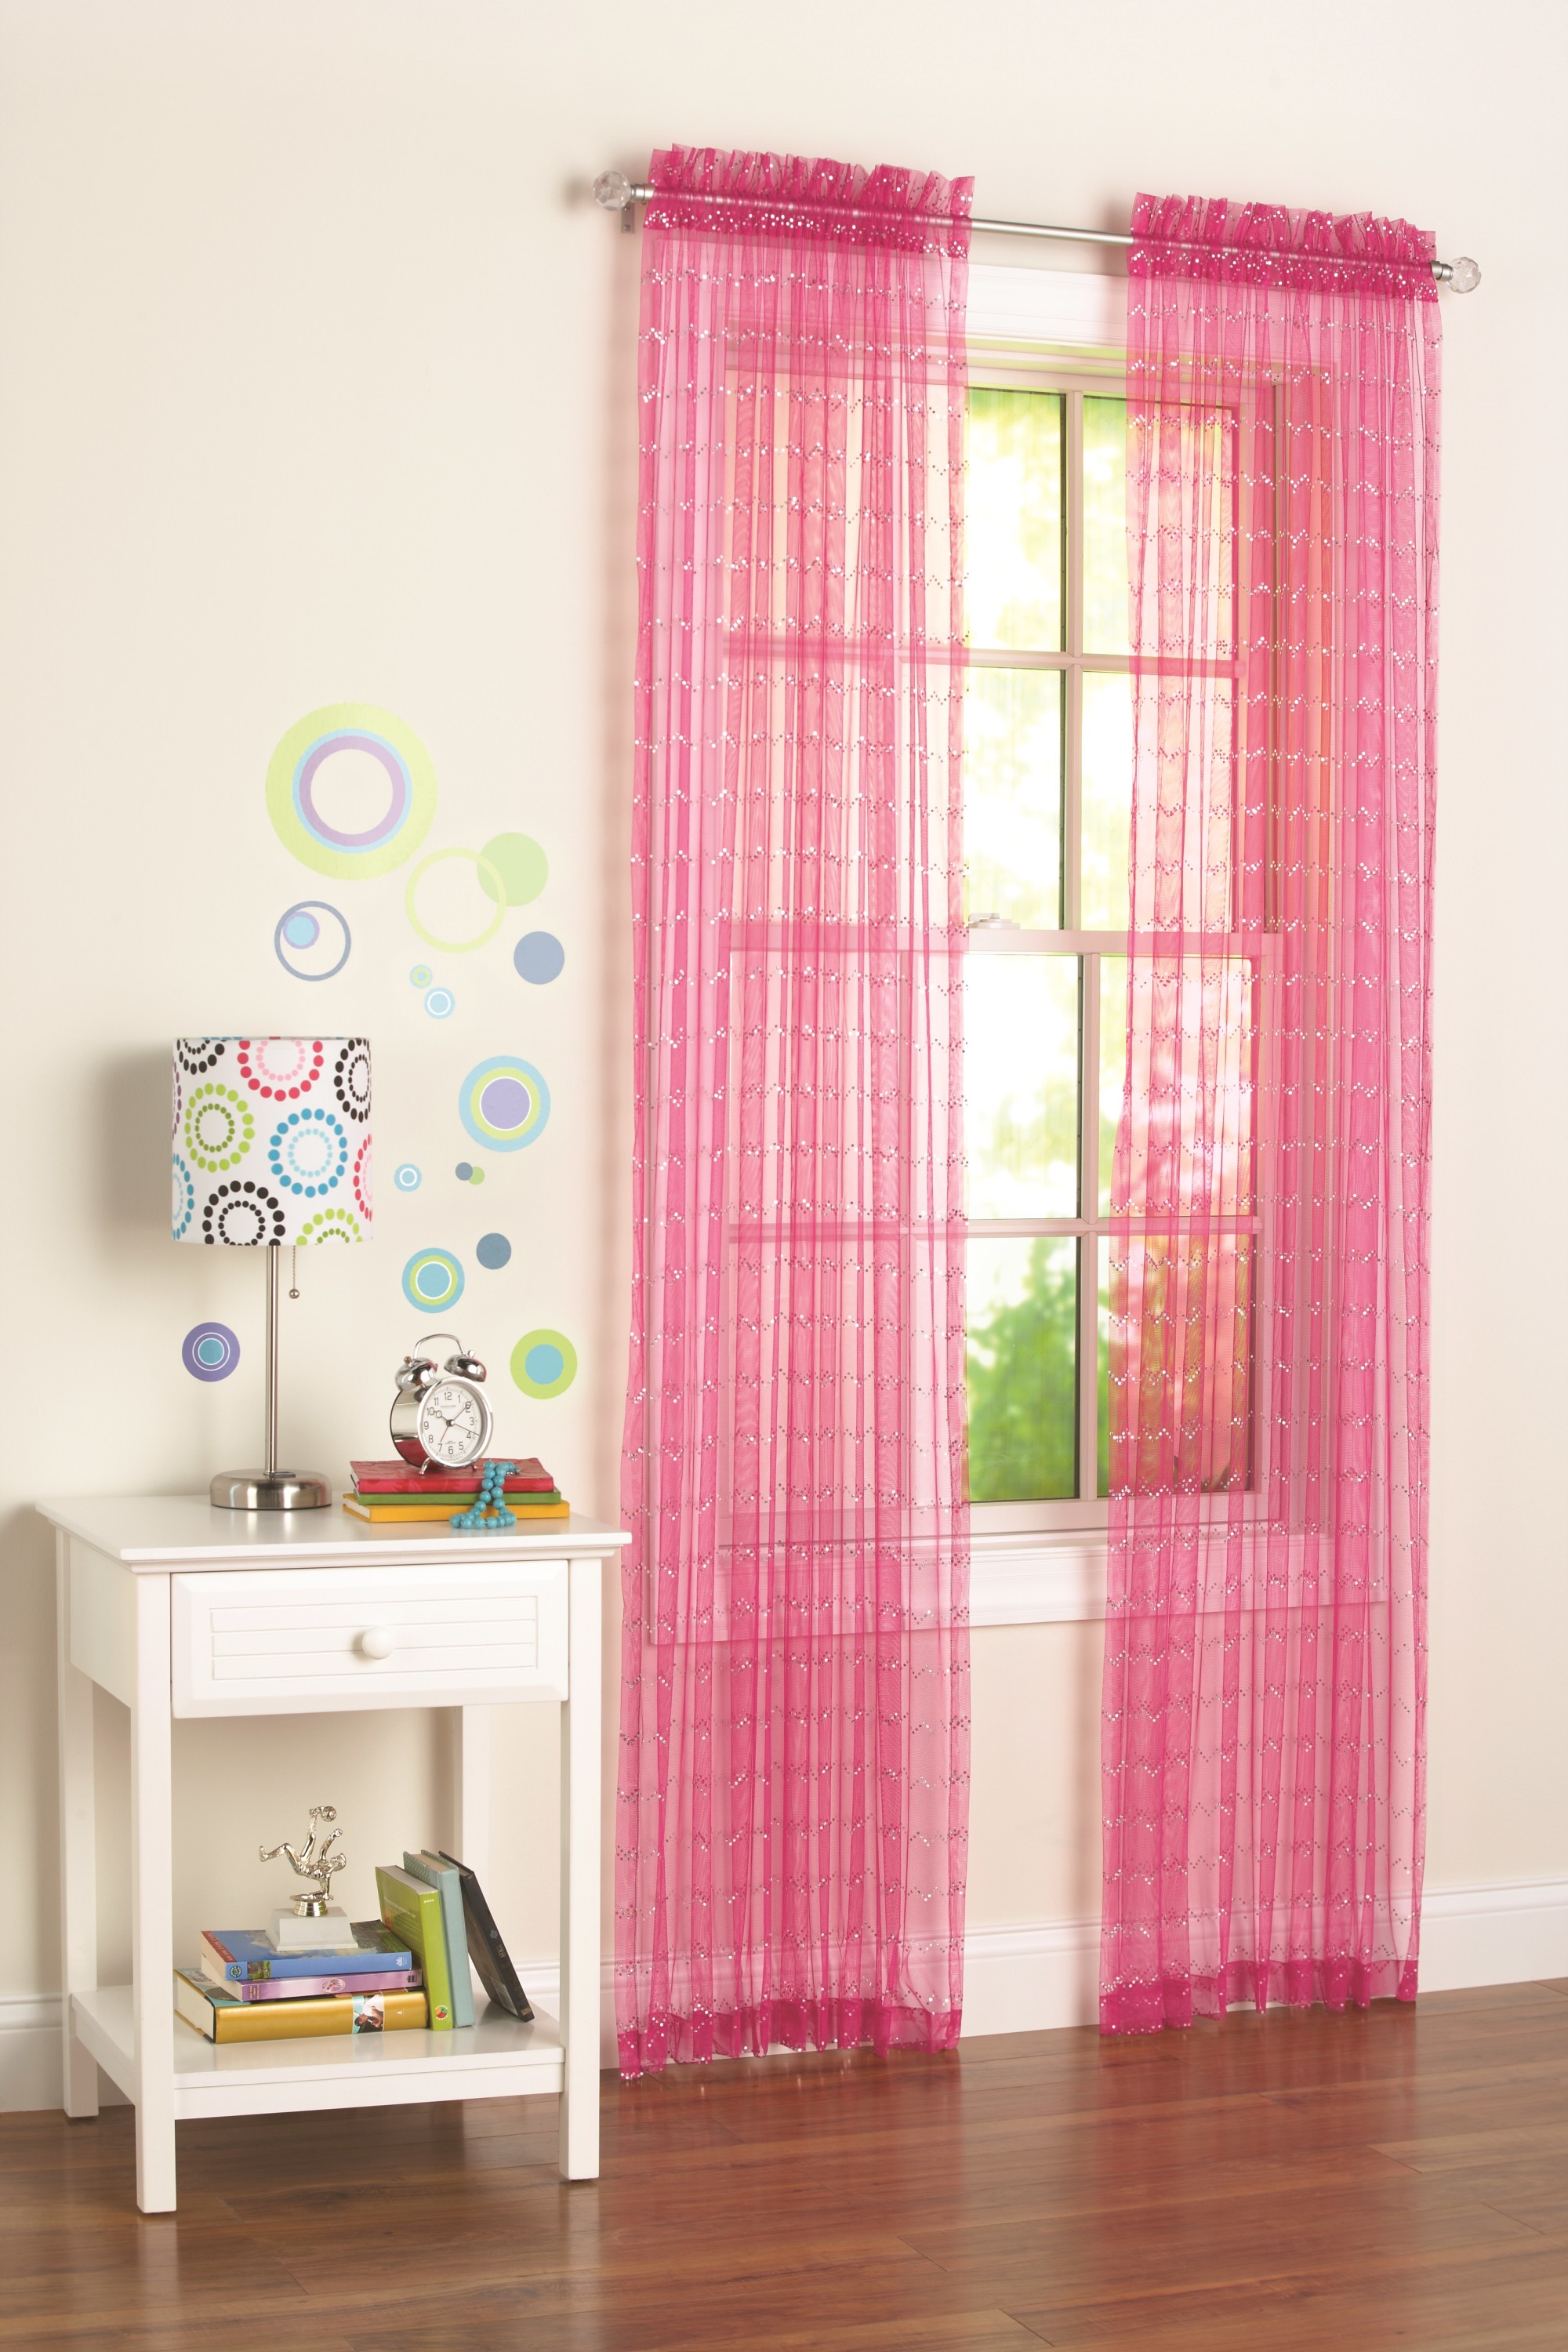 Your Zone, Single Window Panel - Pink - 100% Polyester - 25" x 84" - image 1 of 2